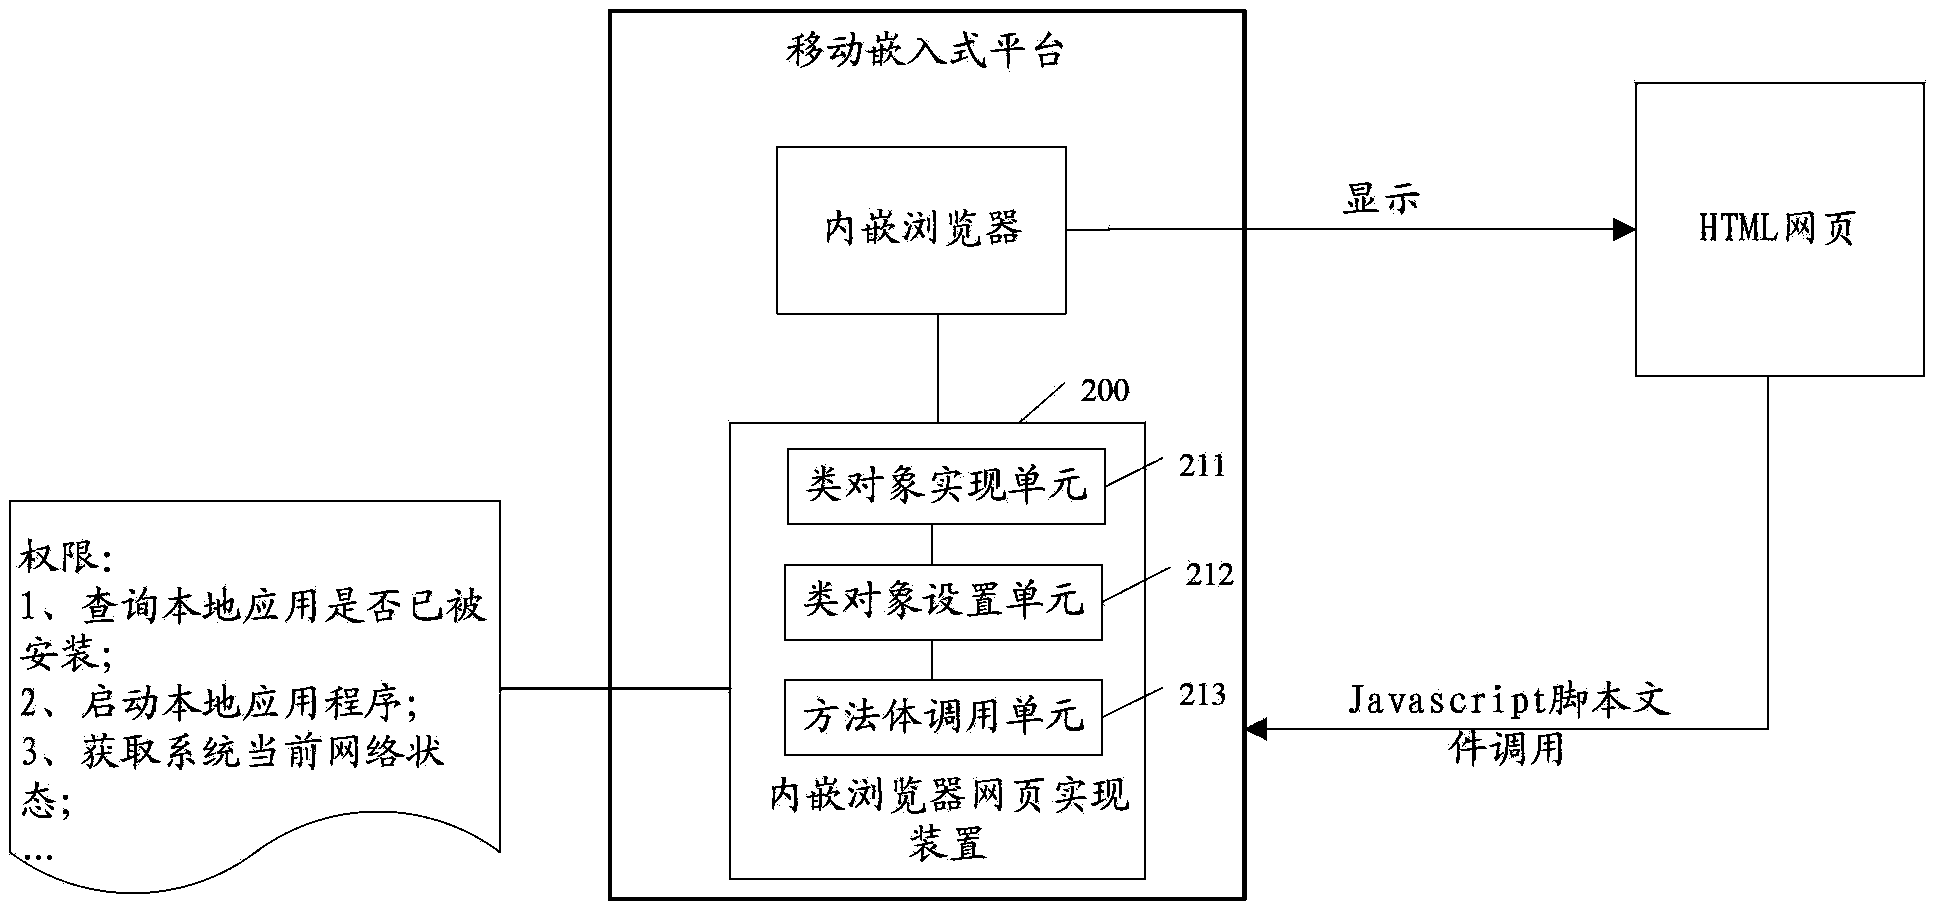 Method and device for implementing embedded browser webpage in mobile embedded platform